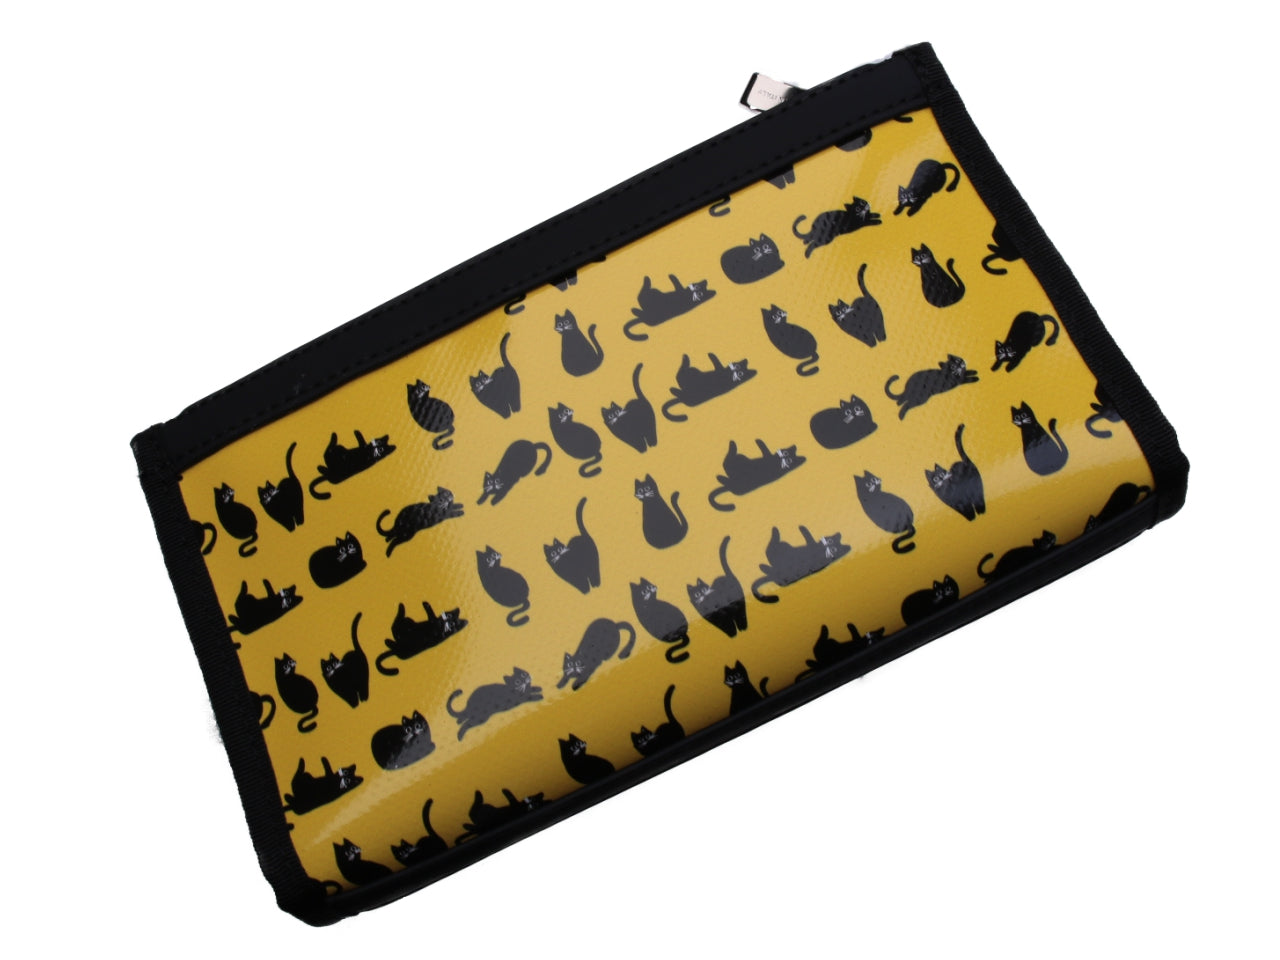 LARGE YELLOW WOMEN'S WALLET "KITTENS". MODEL PIT MADE OF LORRY TARPAULIN. - Limited Edition Paul Meccanico